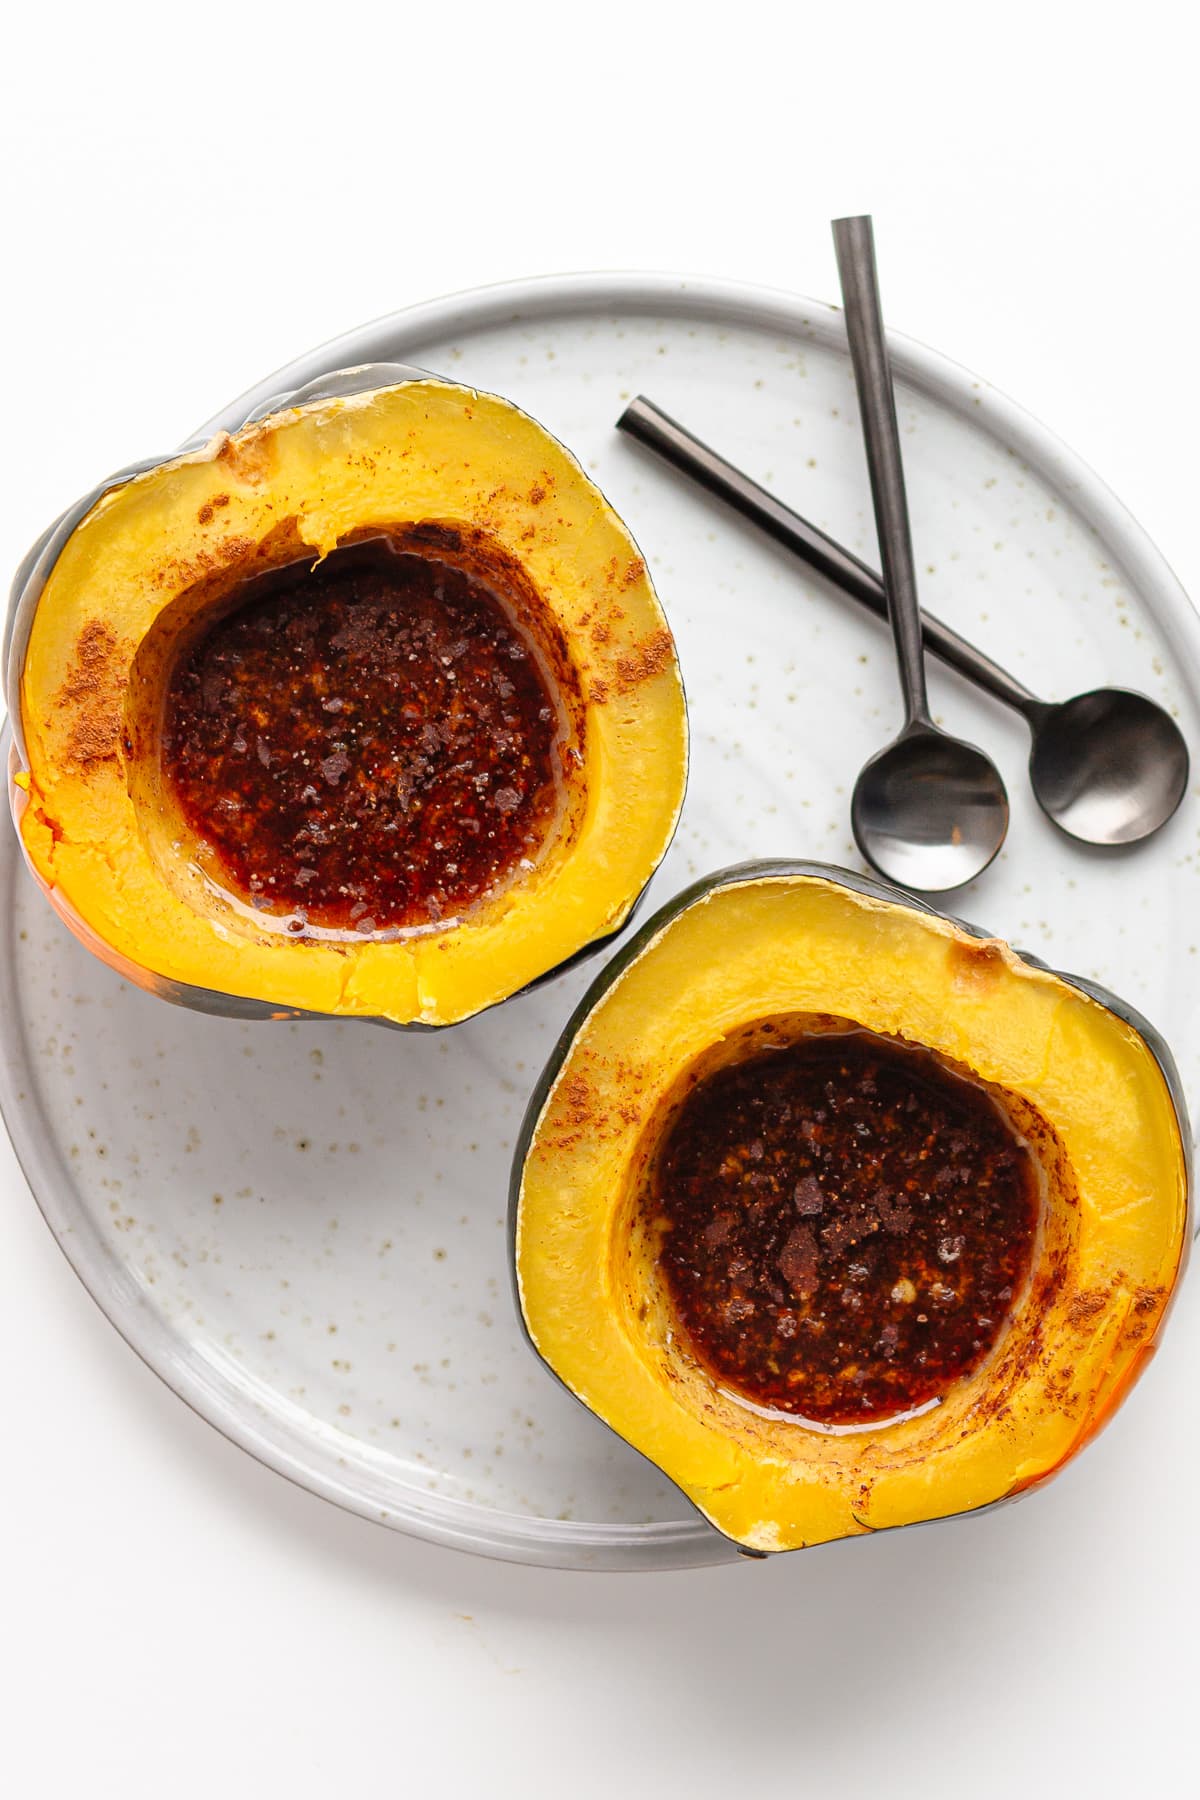 Two acorn squash halves filled with butter, brown sugar and cinnamon on a serving plate with two spoons.